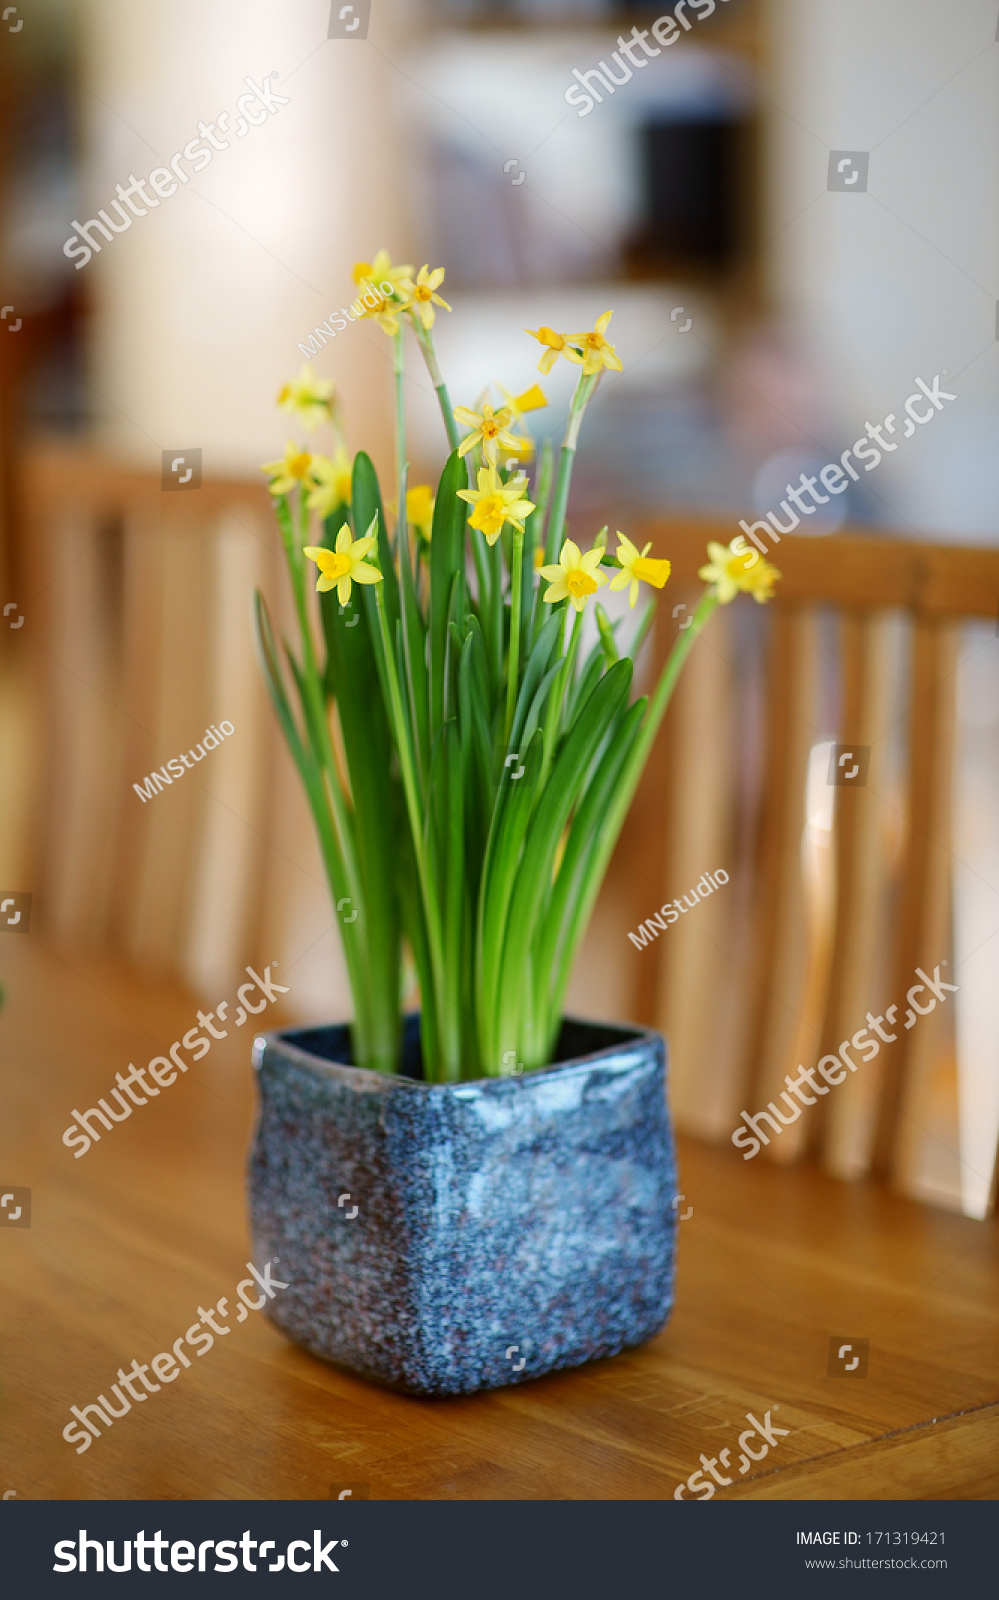 Beautiful Spring Narcissus Flowers Pot On Stock Photo 171319421  Shutterstock